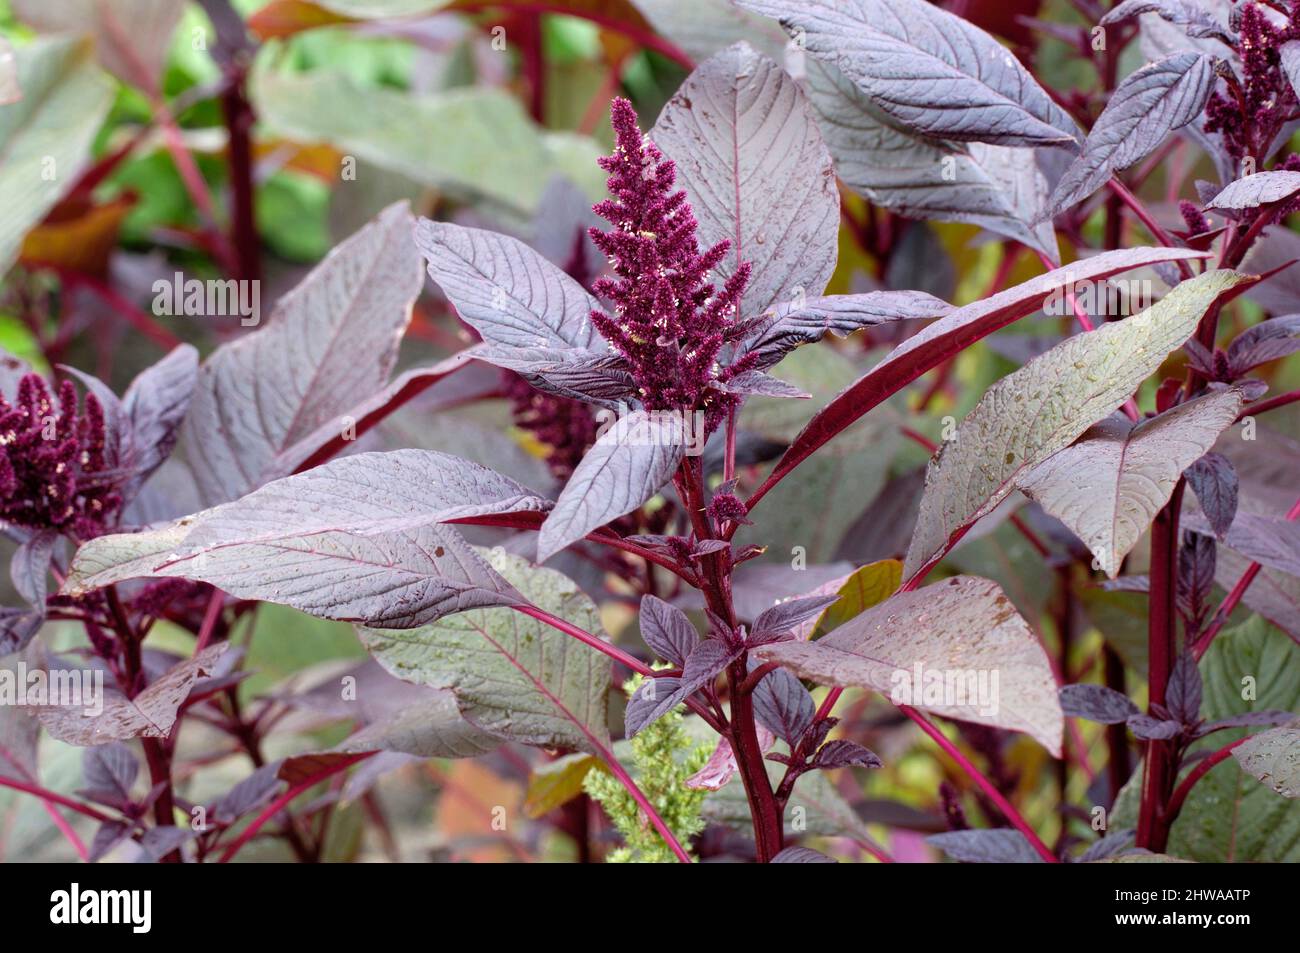 Prince-of-Wales feather, prince's-feather (Amaranthus hypochondriacus), blooming Stock Photo